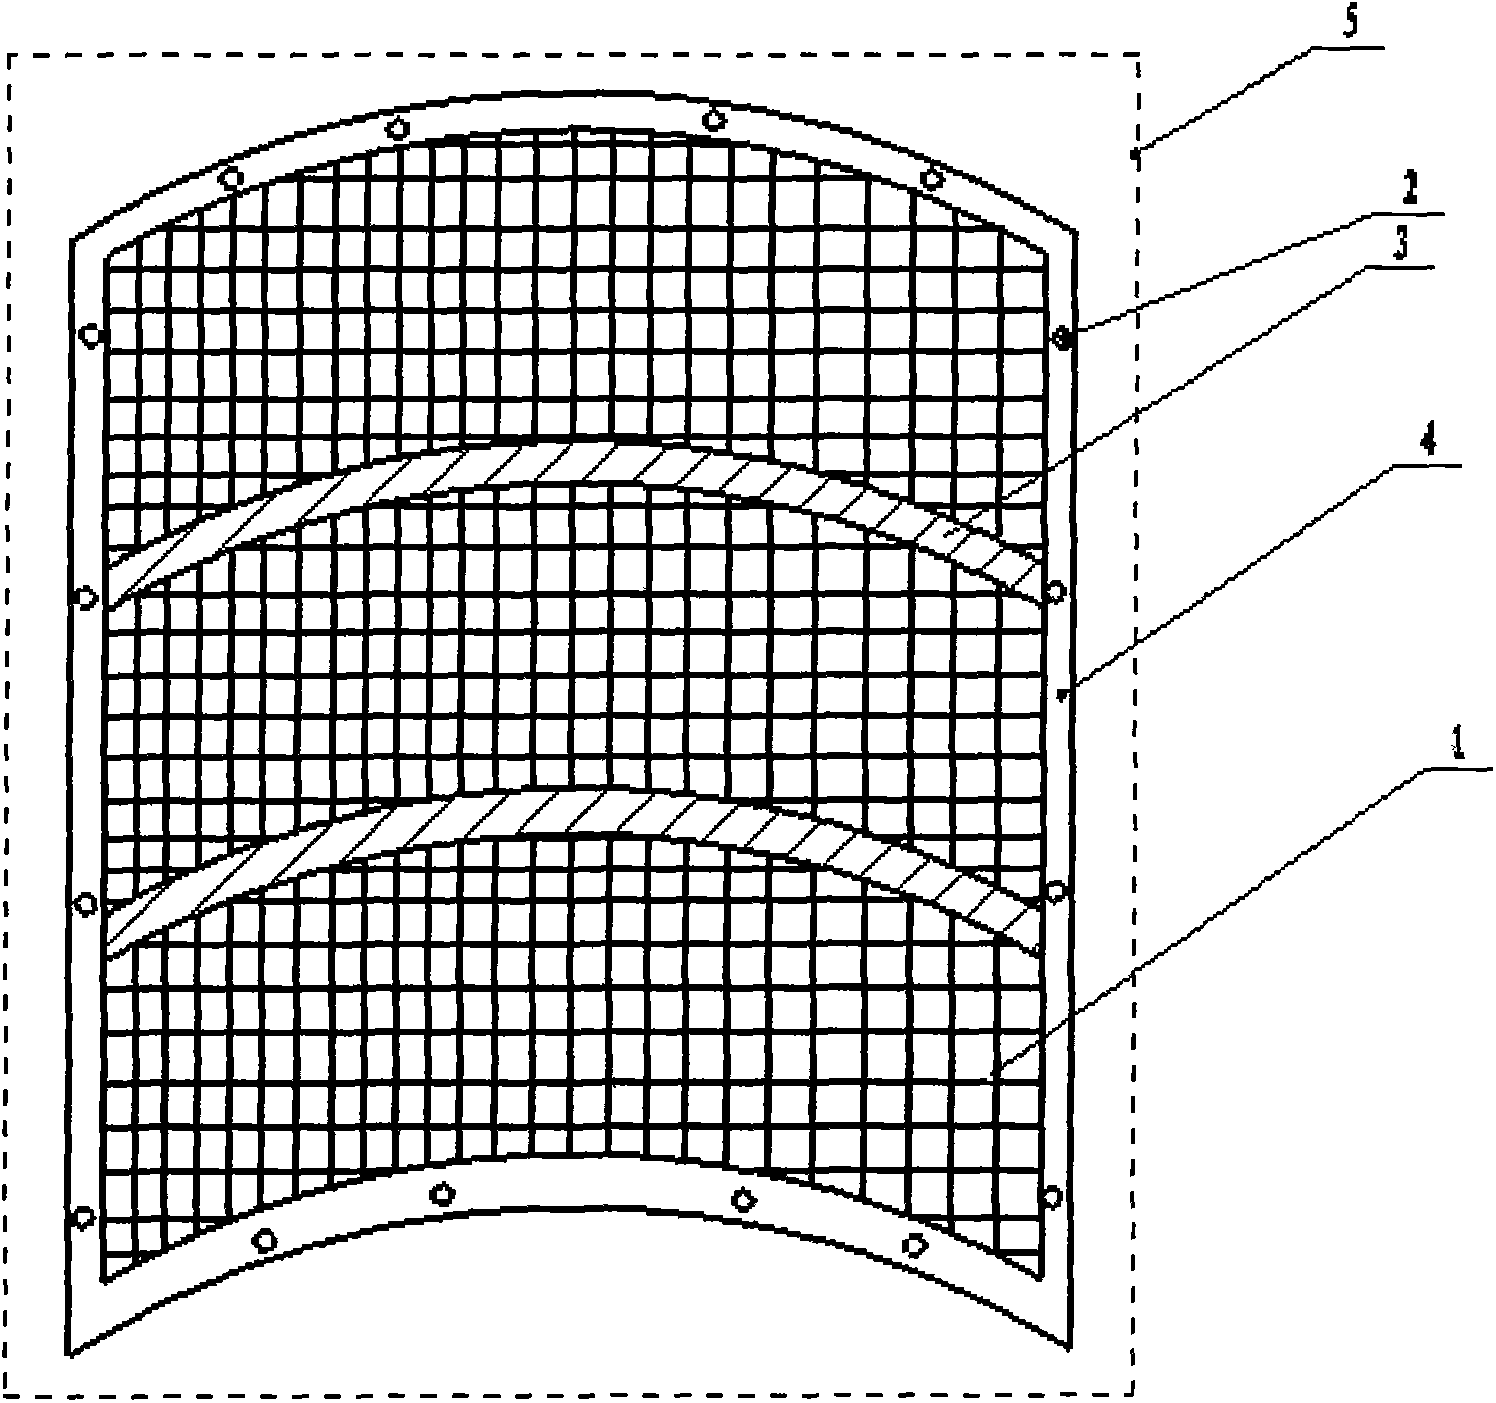 Construction method using glass fiber reinforced plastics as inner cavity protective materials for steel and concrete chimney